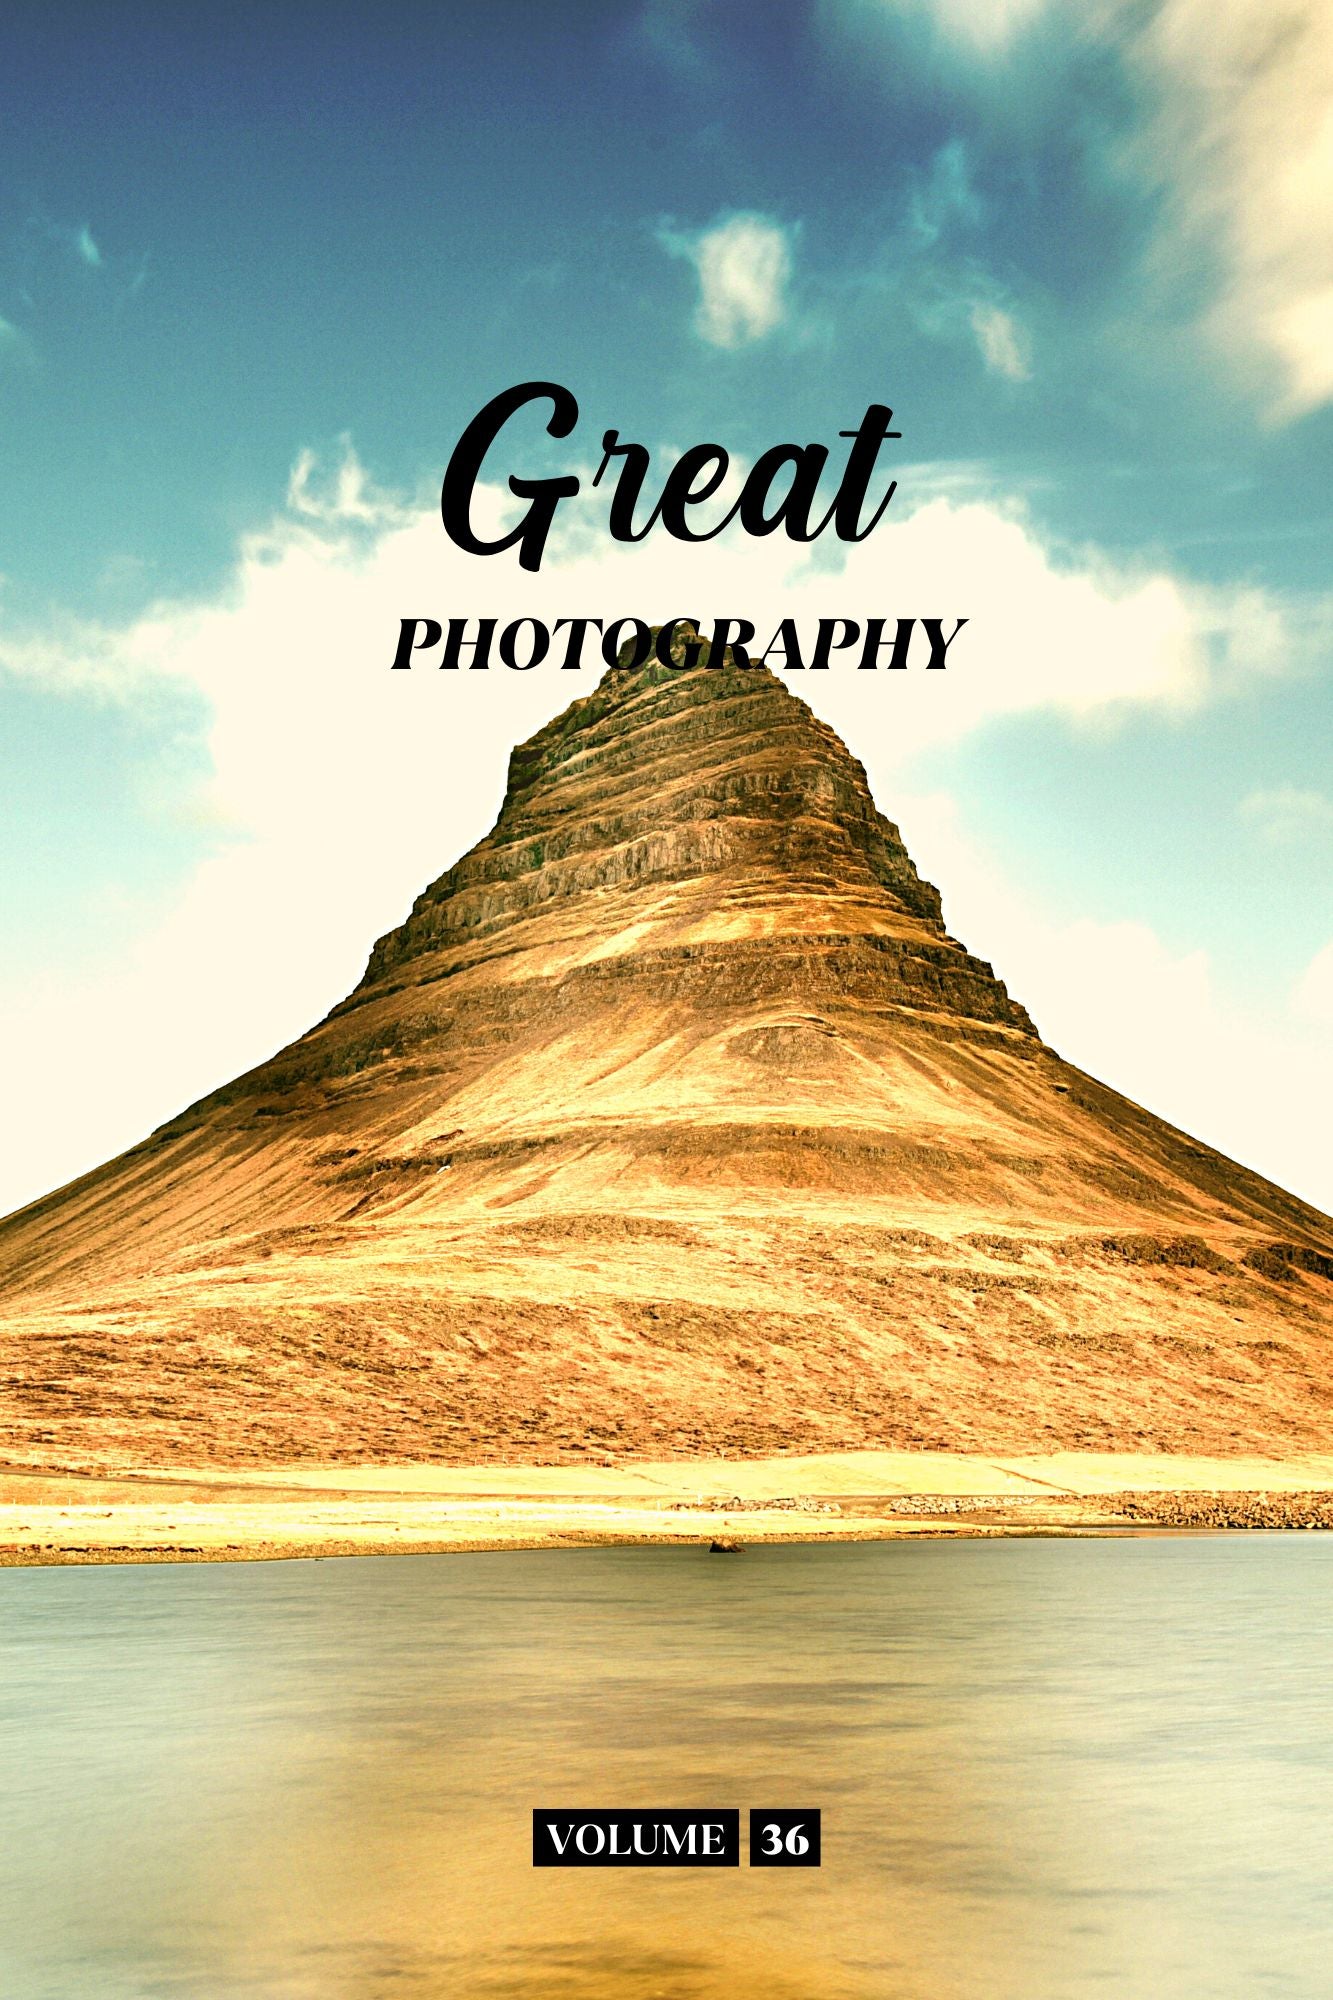 Great Photography Volume 36 (Physical Book Pre-Order)